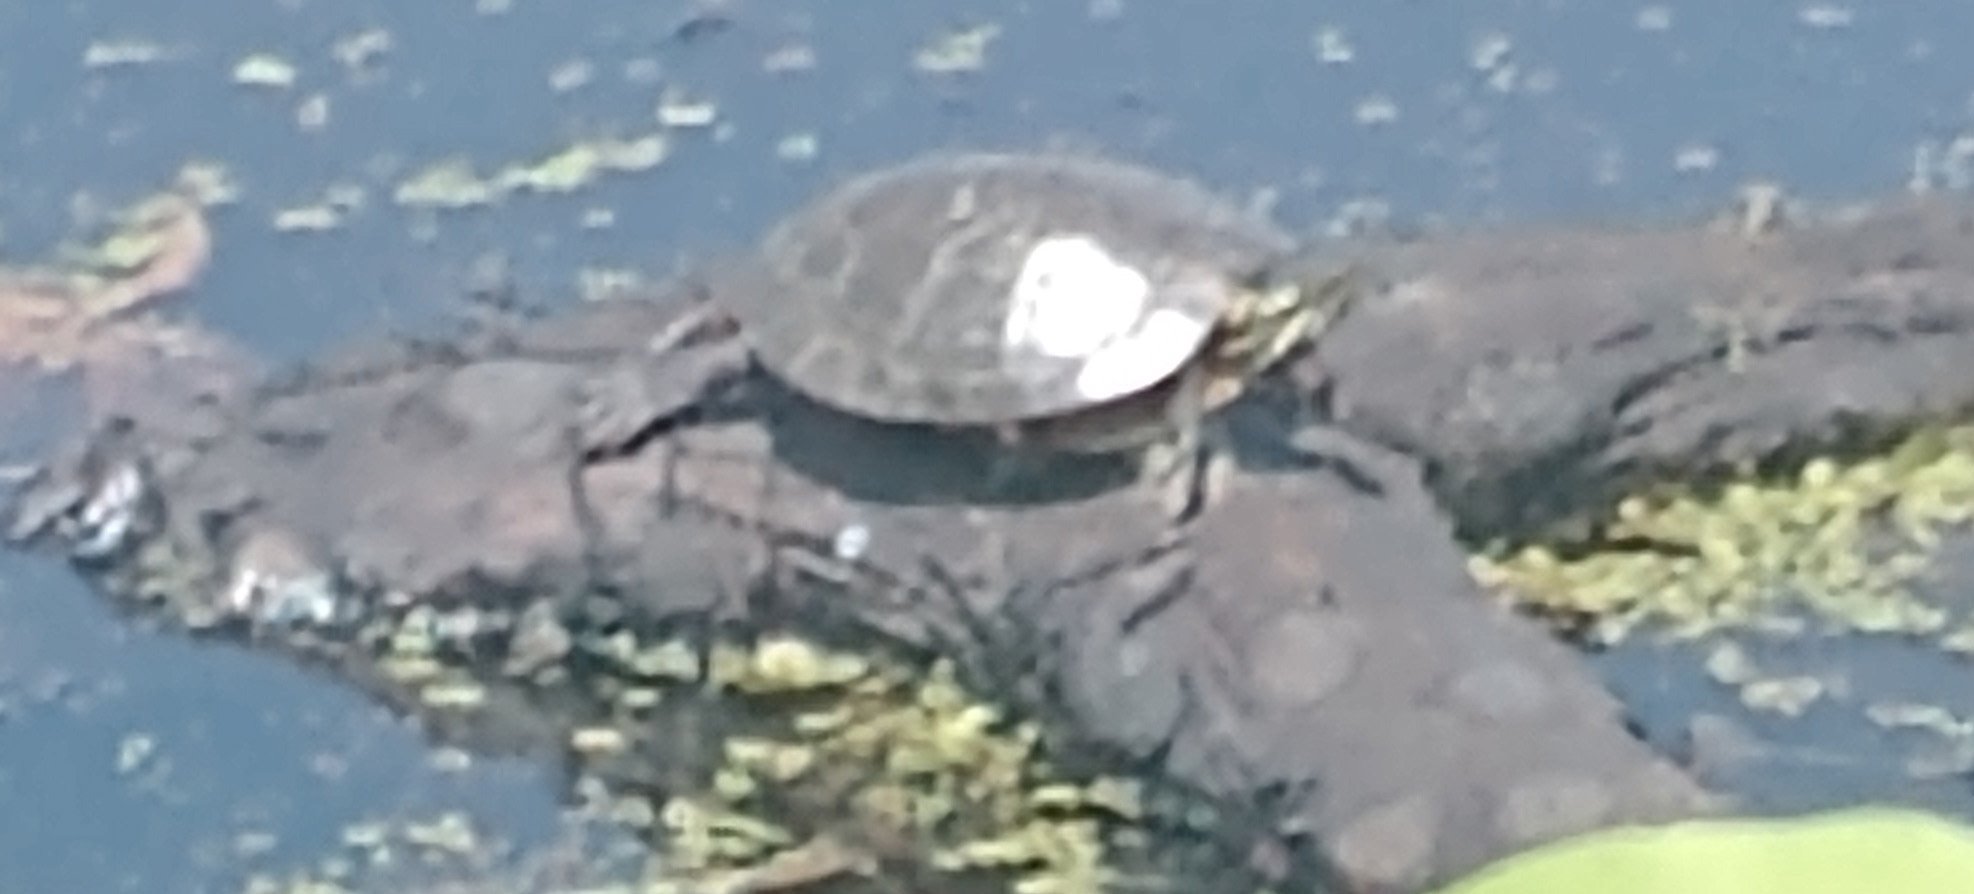 If you're lucky you can see some turtles taking a sun bath.